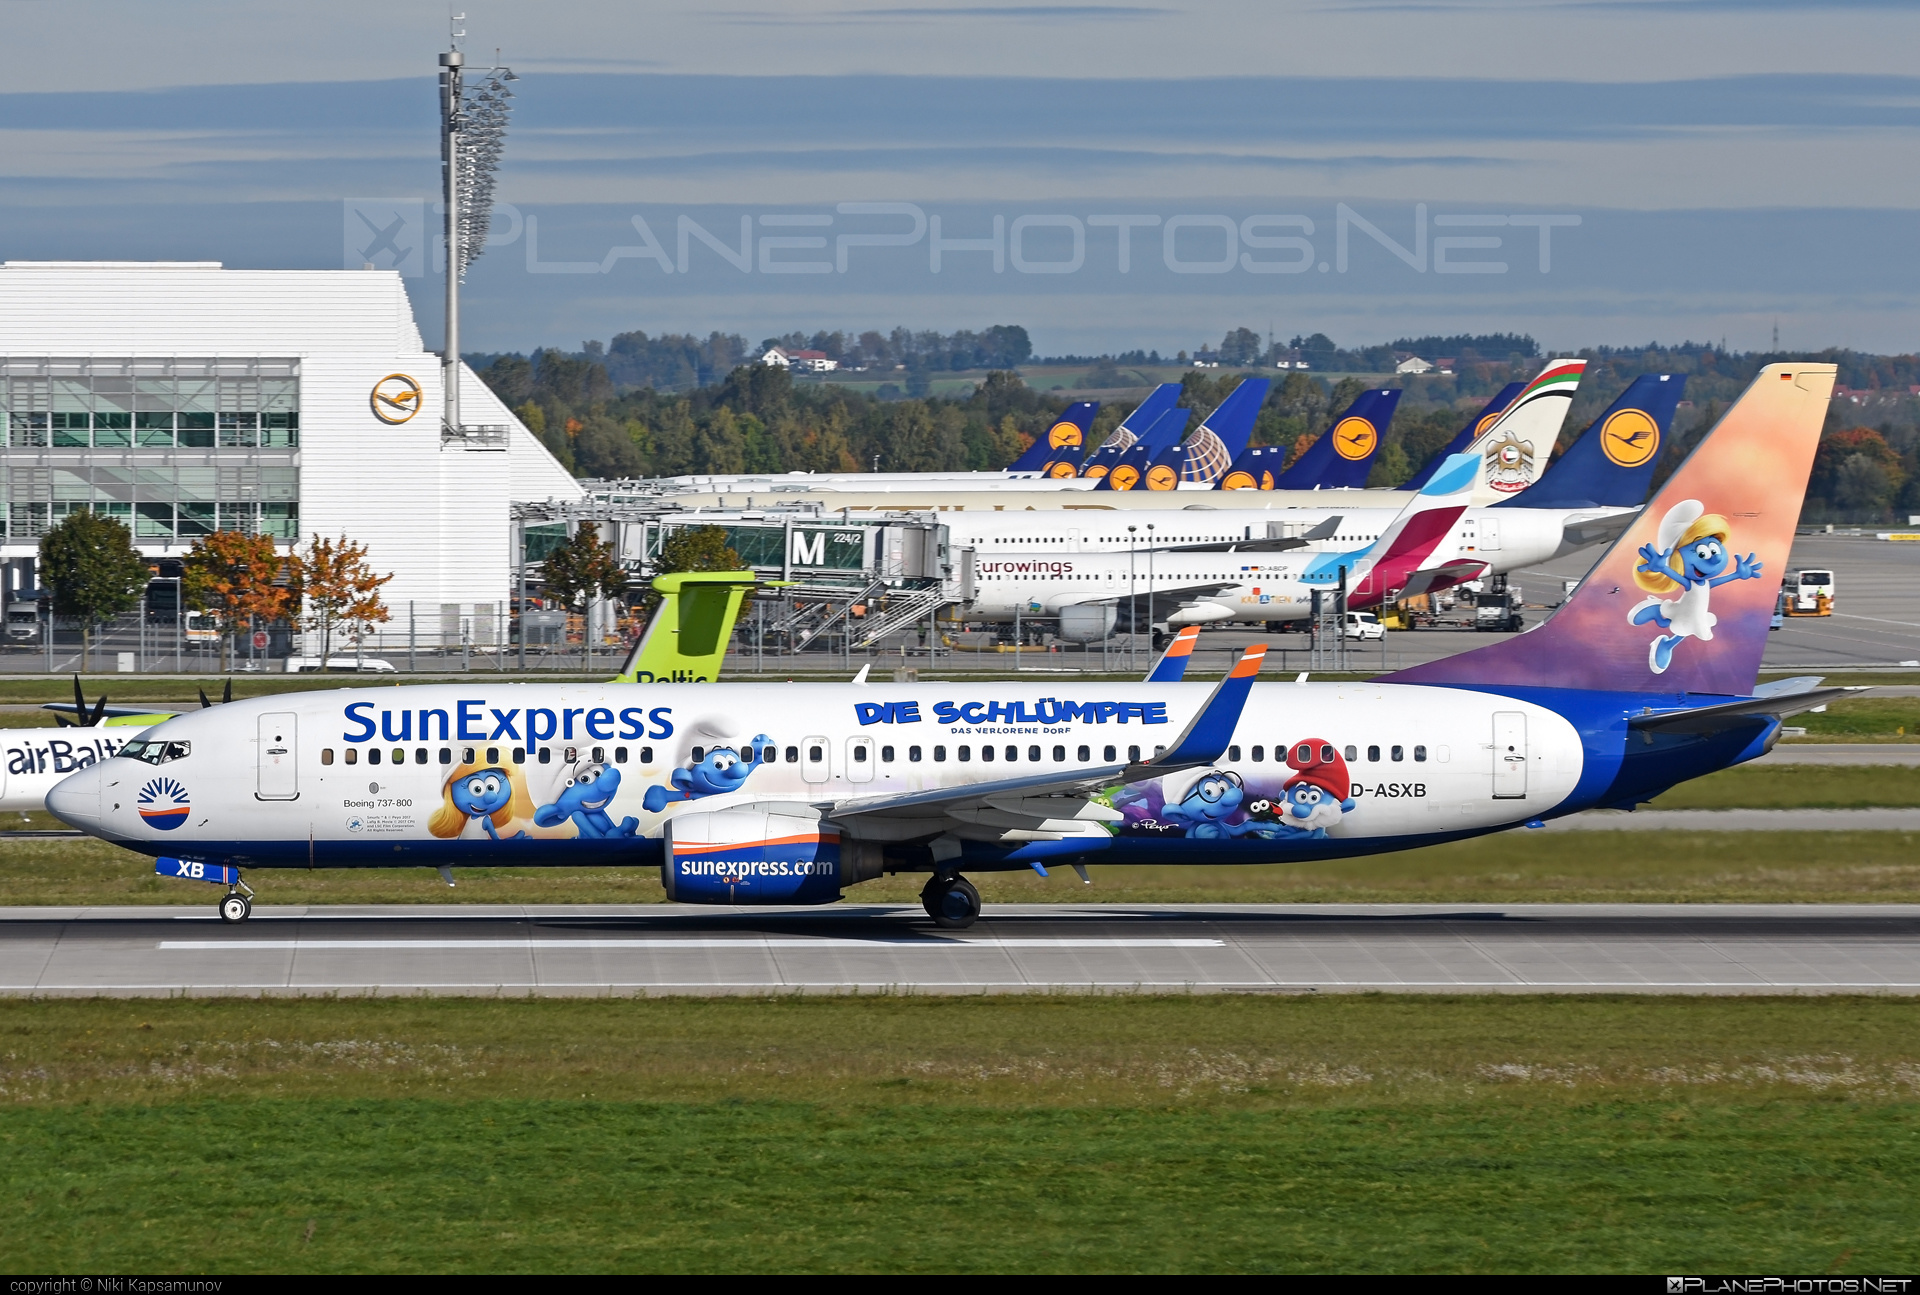 Boeing 737-800 - D-ASXB operated by SunExpress Deutschland #b737 #b737nextgen #b737ng #boeing #boeing737 #sunexpress #sunexpressdeutschland